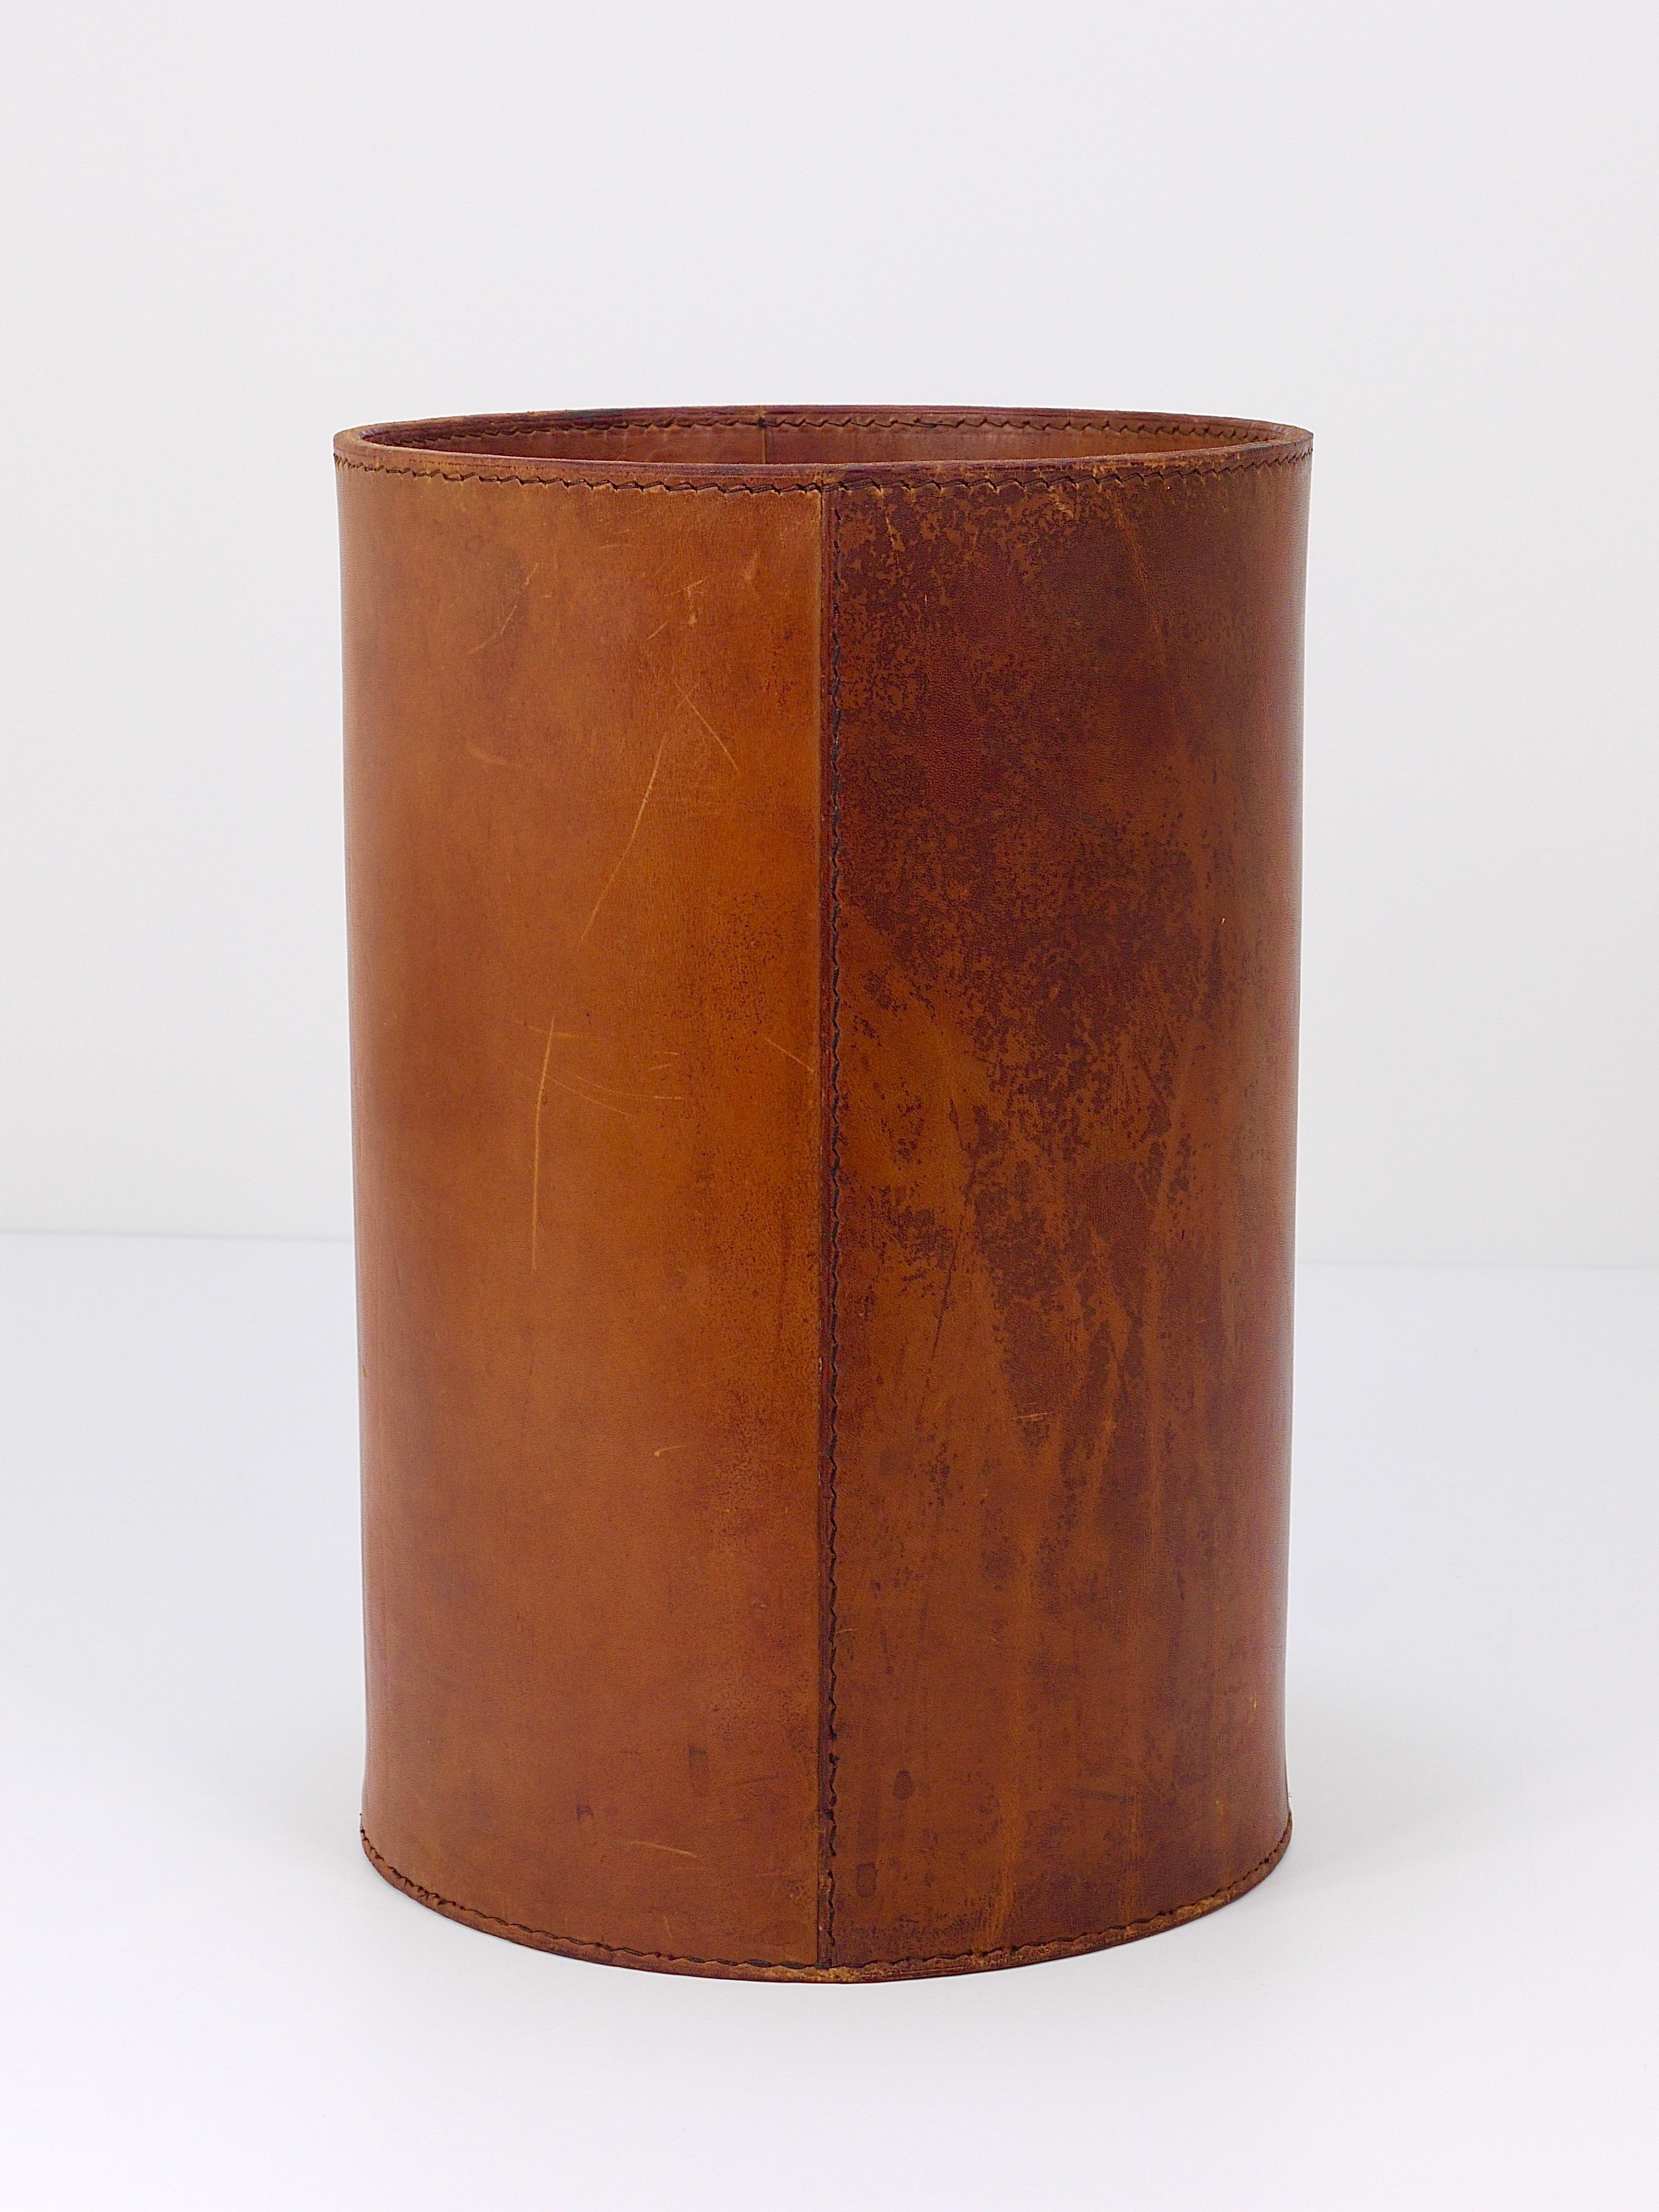 A beautiful and elegant, vintage Mid-Century Modern cylindric paper basket / paper bin from the 1950s. Designed an manufactured by Werkstätte Carl Aubock, Vienna / Austria. Handmade and hand-sewn from thick cognac brown tan saddle leather. In good